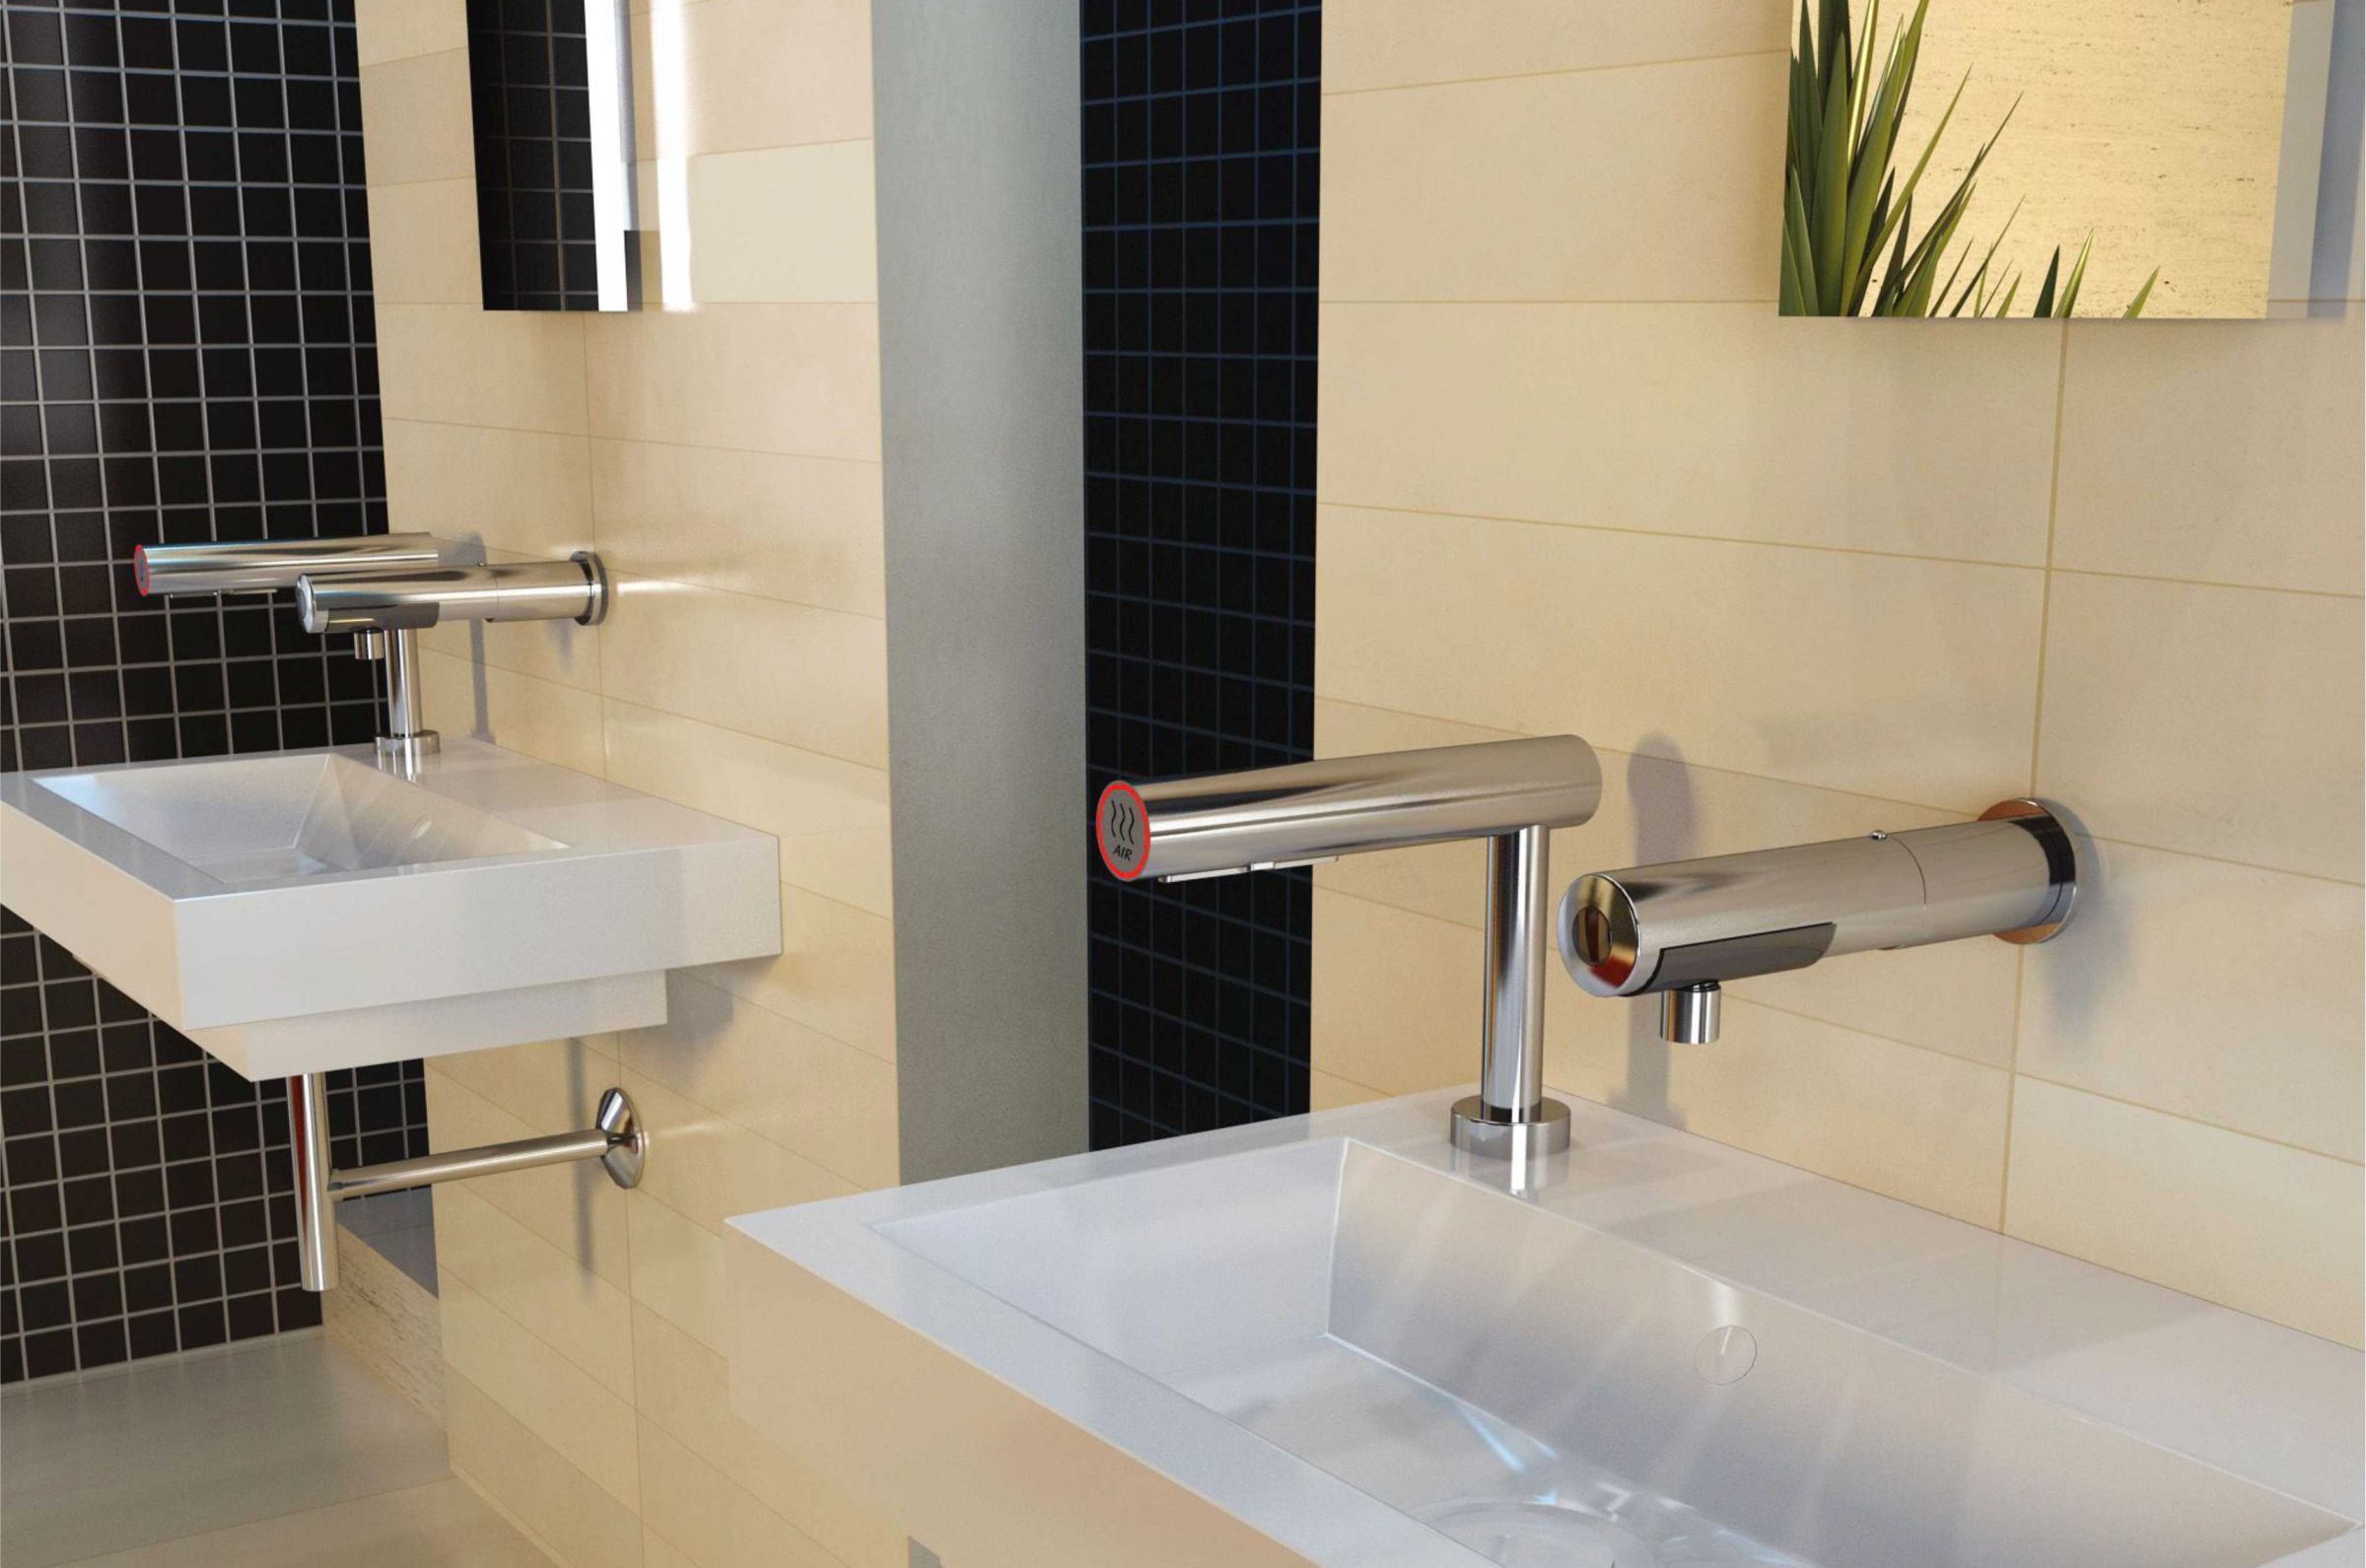 Hokwang offers a wide range of commercial restroom products